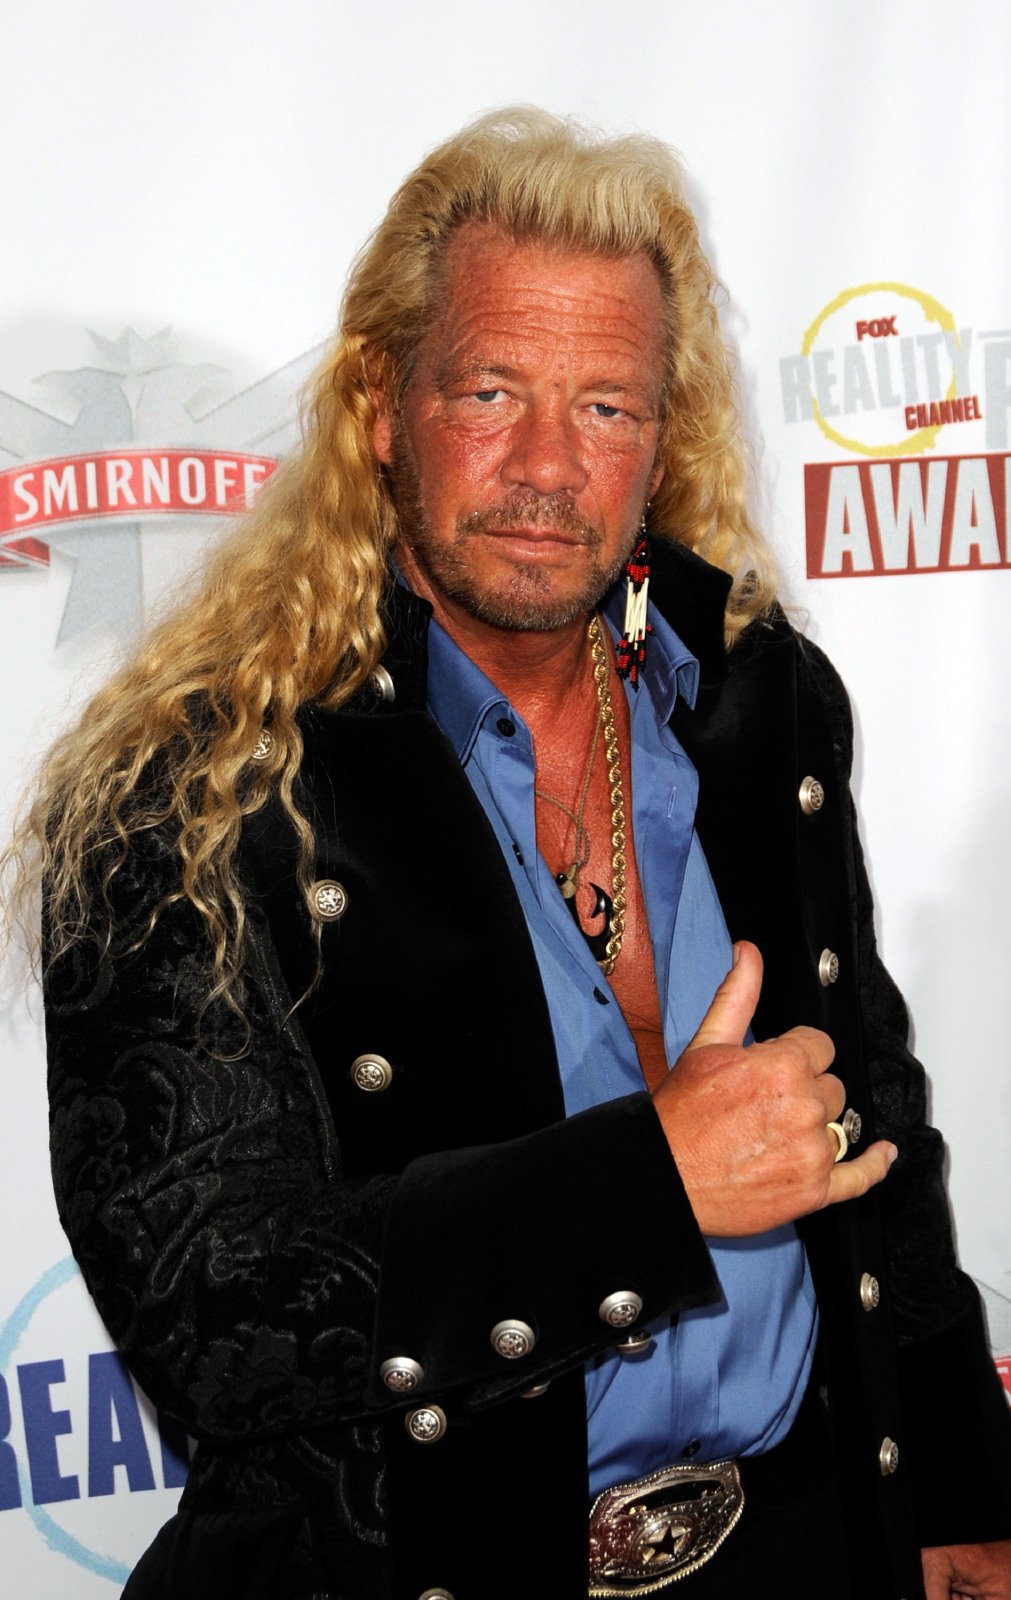 Duane "Dog" Chapman arrives at the Fox Reality Channel Really Awards at the Avalon Hollywood club September 24, 2008 in Hollywood California | Photo: Getty Images 